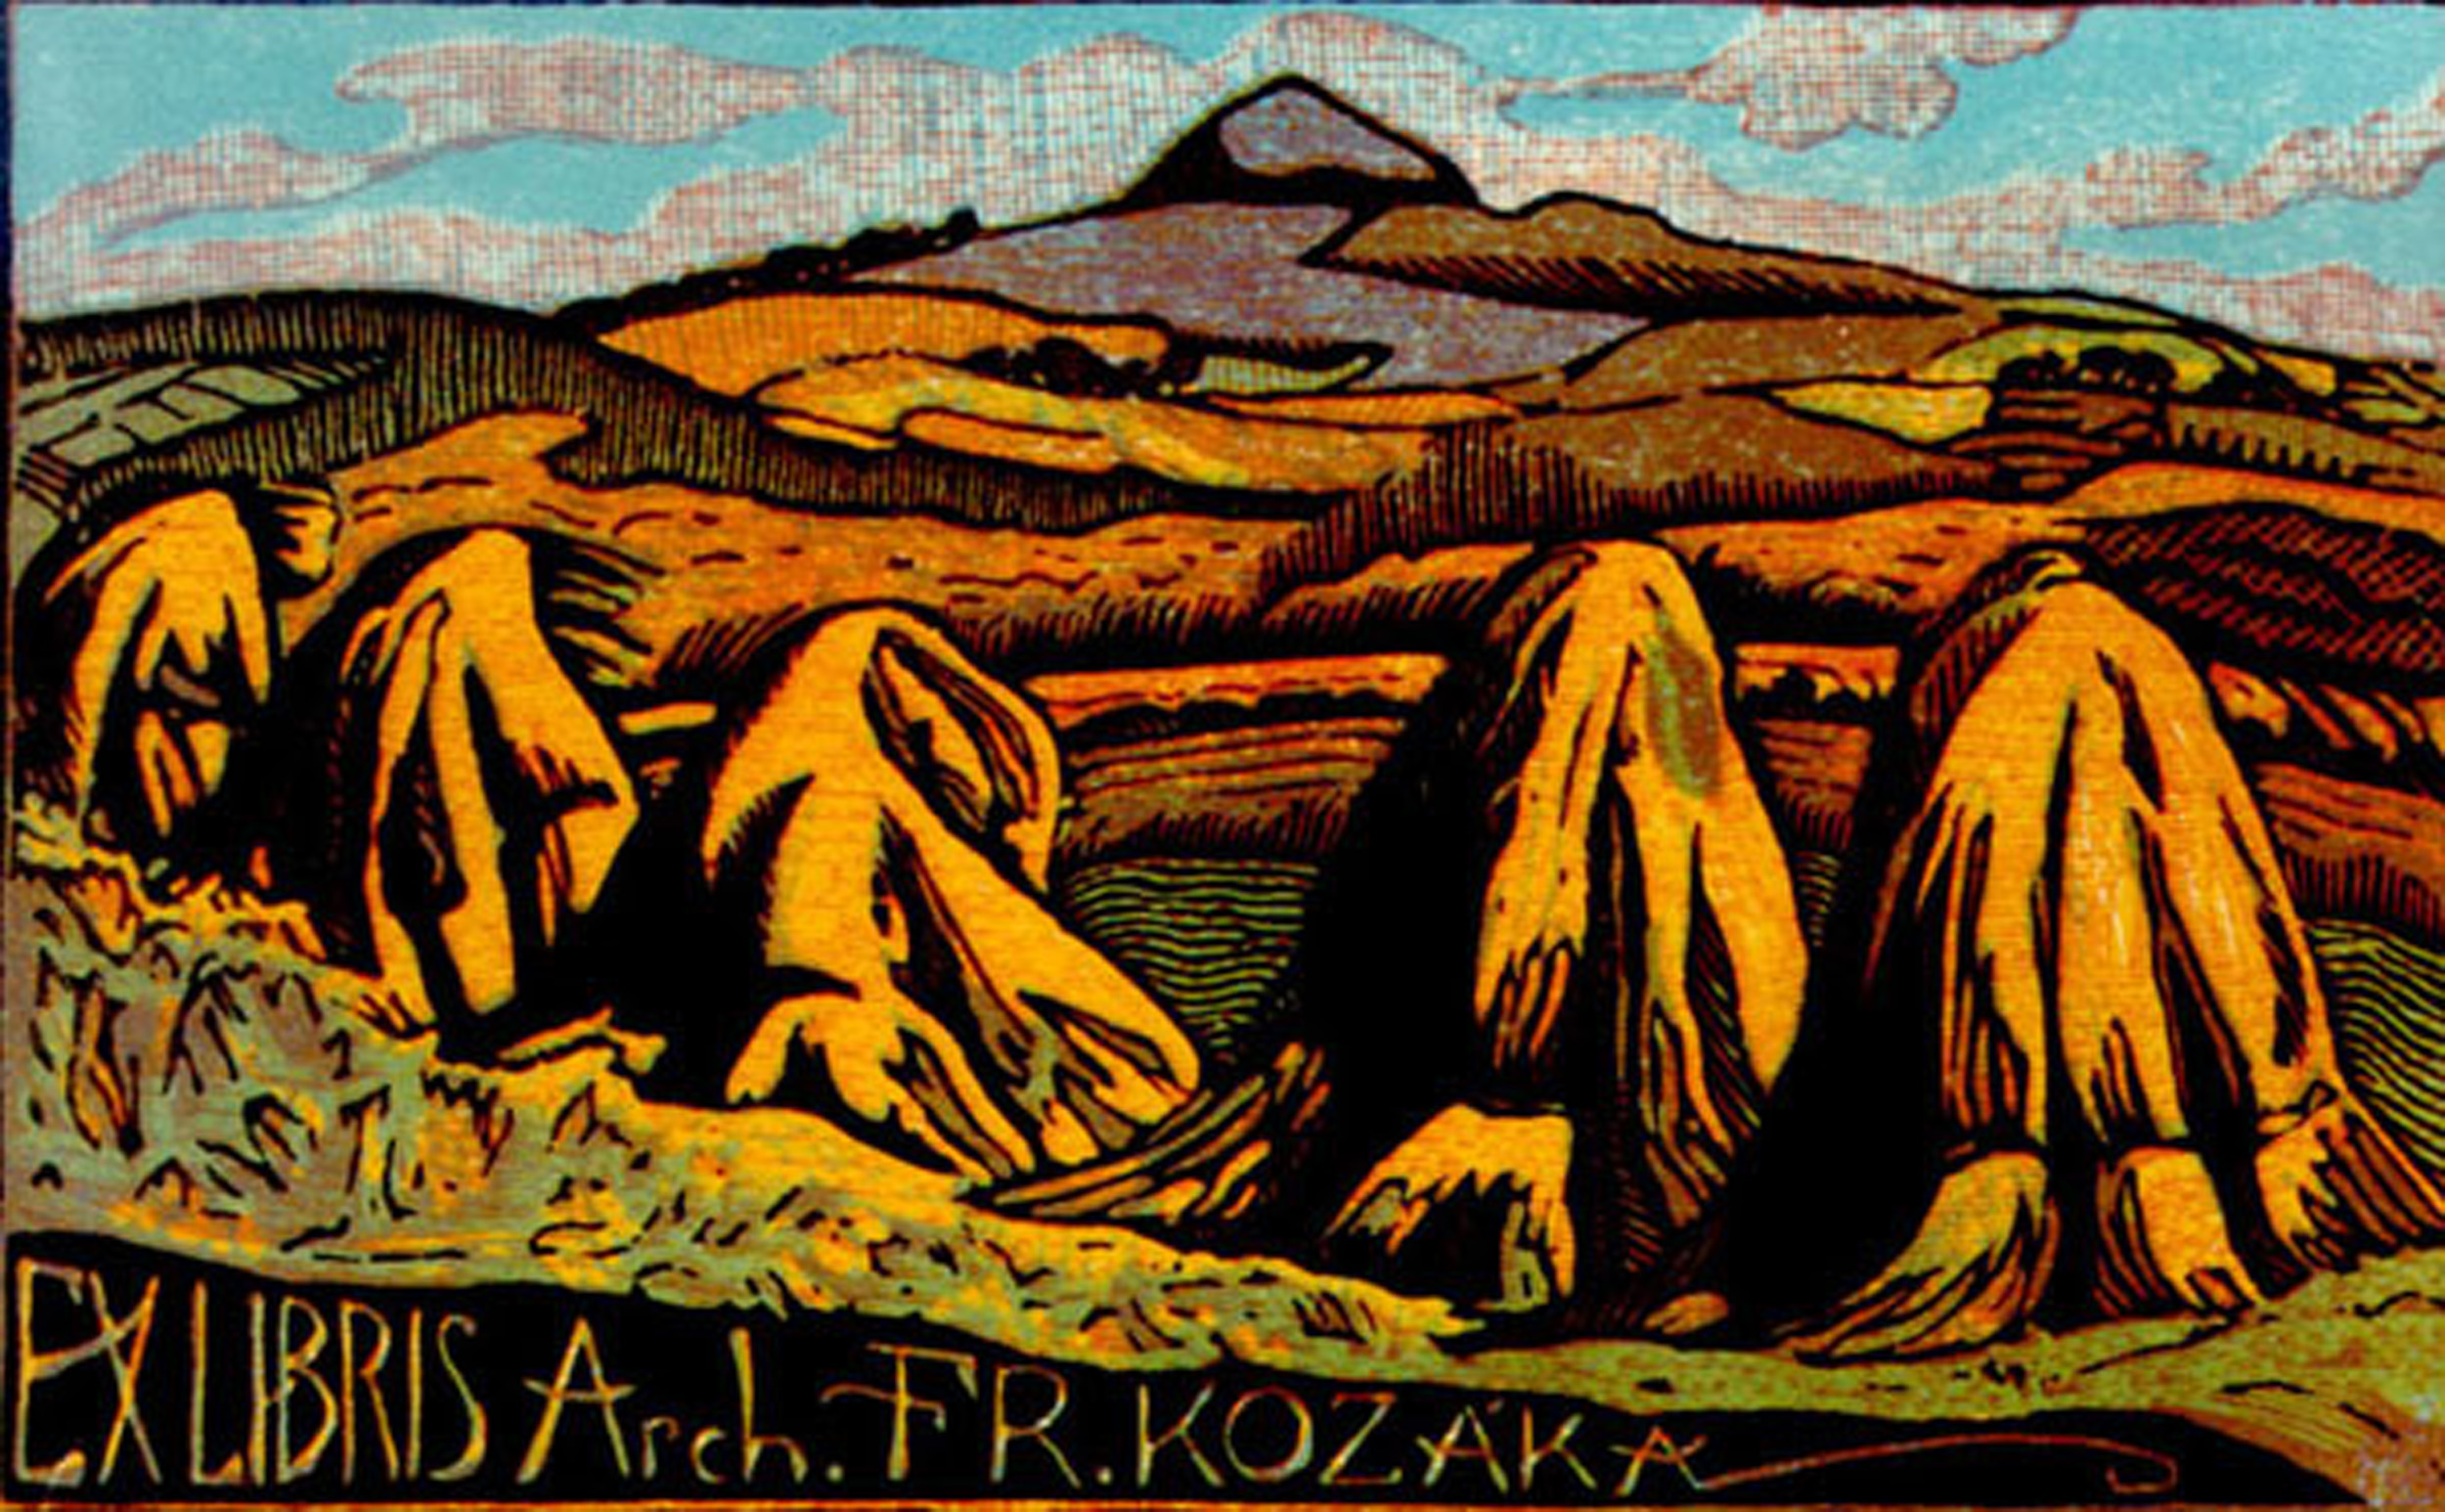 Reminder: No known copyright restrictions. Please credit UBC Library as the image source. For more information see http://digitalcollections.library.ubc.ca/cdm/about. Date: [unknown] Notes: Pictorial bookplate. The bookplate portrays a landscape with either haystacks or large rocks in the foreground and rolling hills in the background ; Bookplate Type : Pictorial ; Bookplate Function : OwnershipPersonal Source: Original Format: University of British Columbia. Library. Rare Books and Special Collections. Thomas Murray Collection Permanent URL: http://digitalcollections.library.ubc.ca/cdm/ref/collection/bookplate/id/169